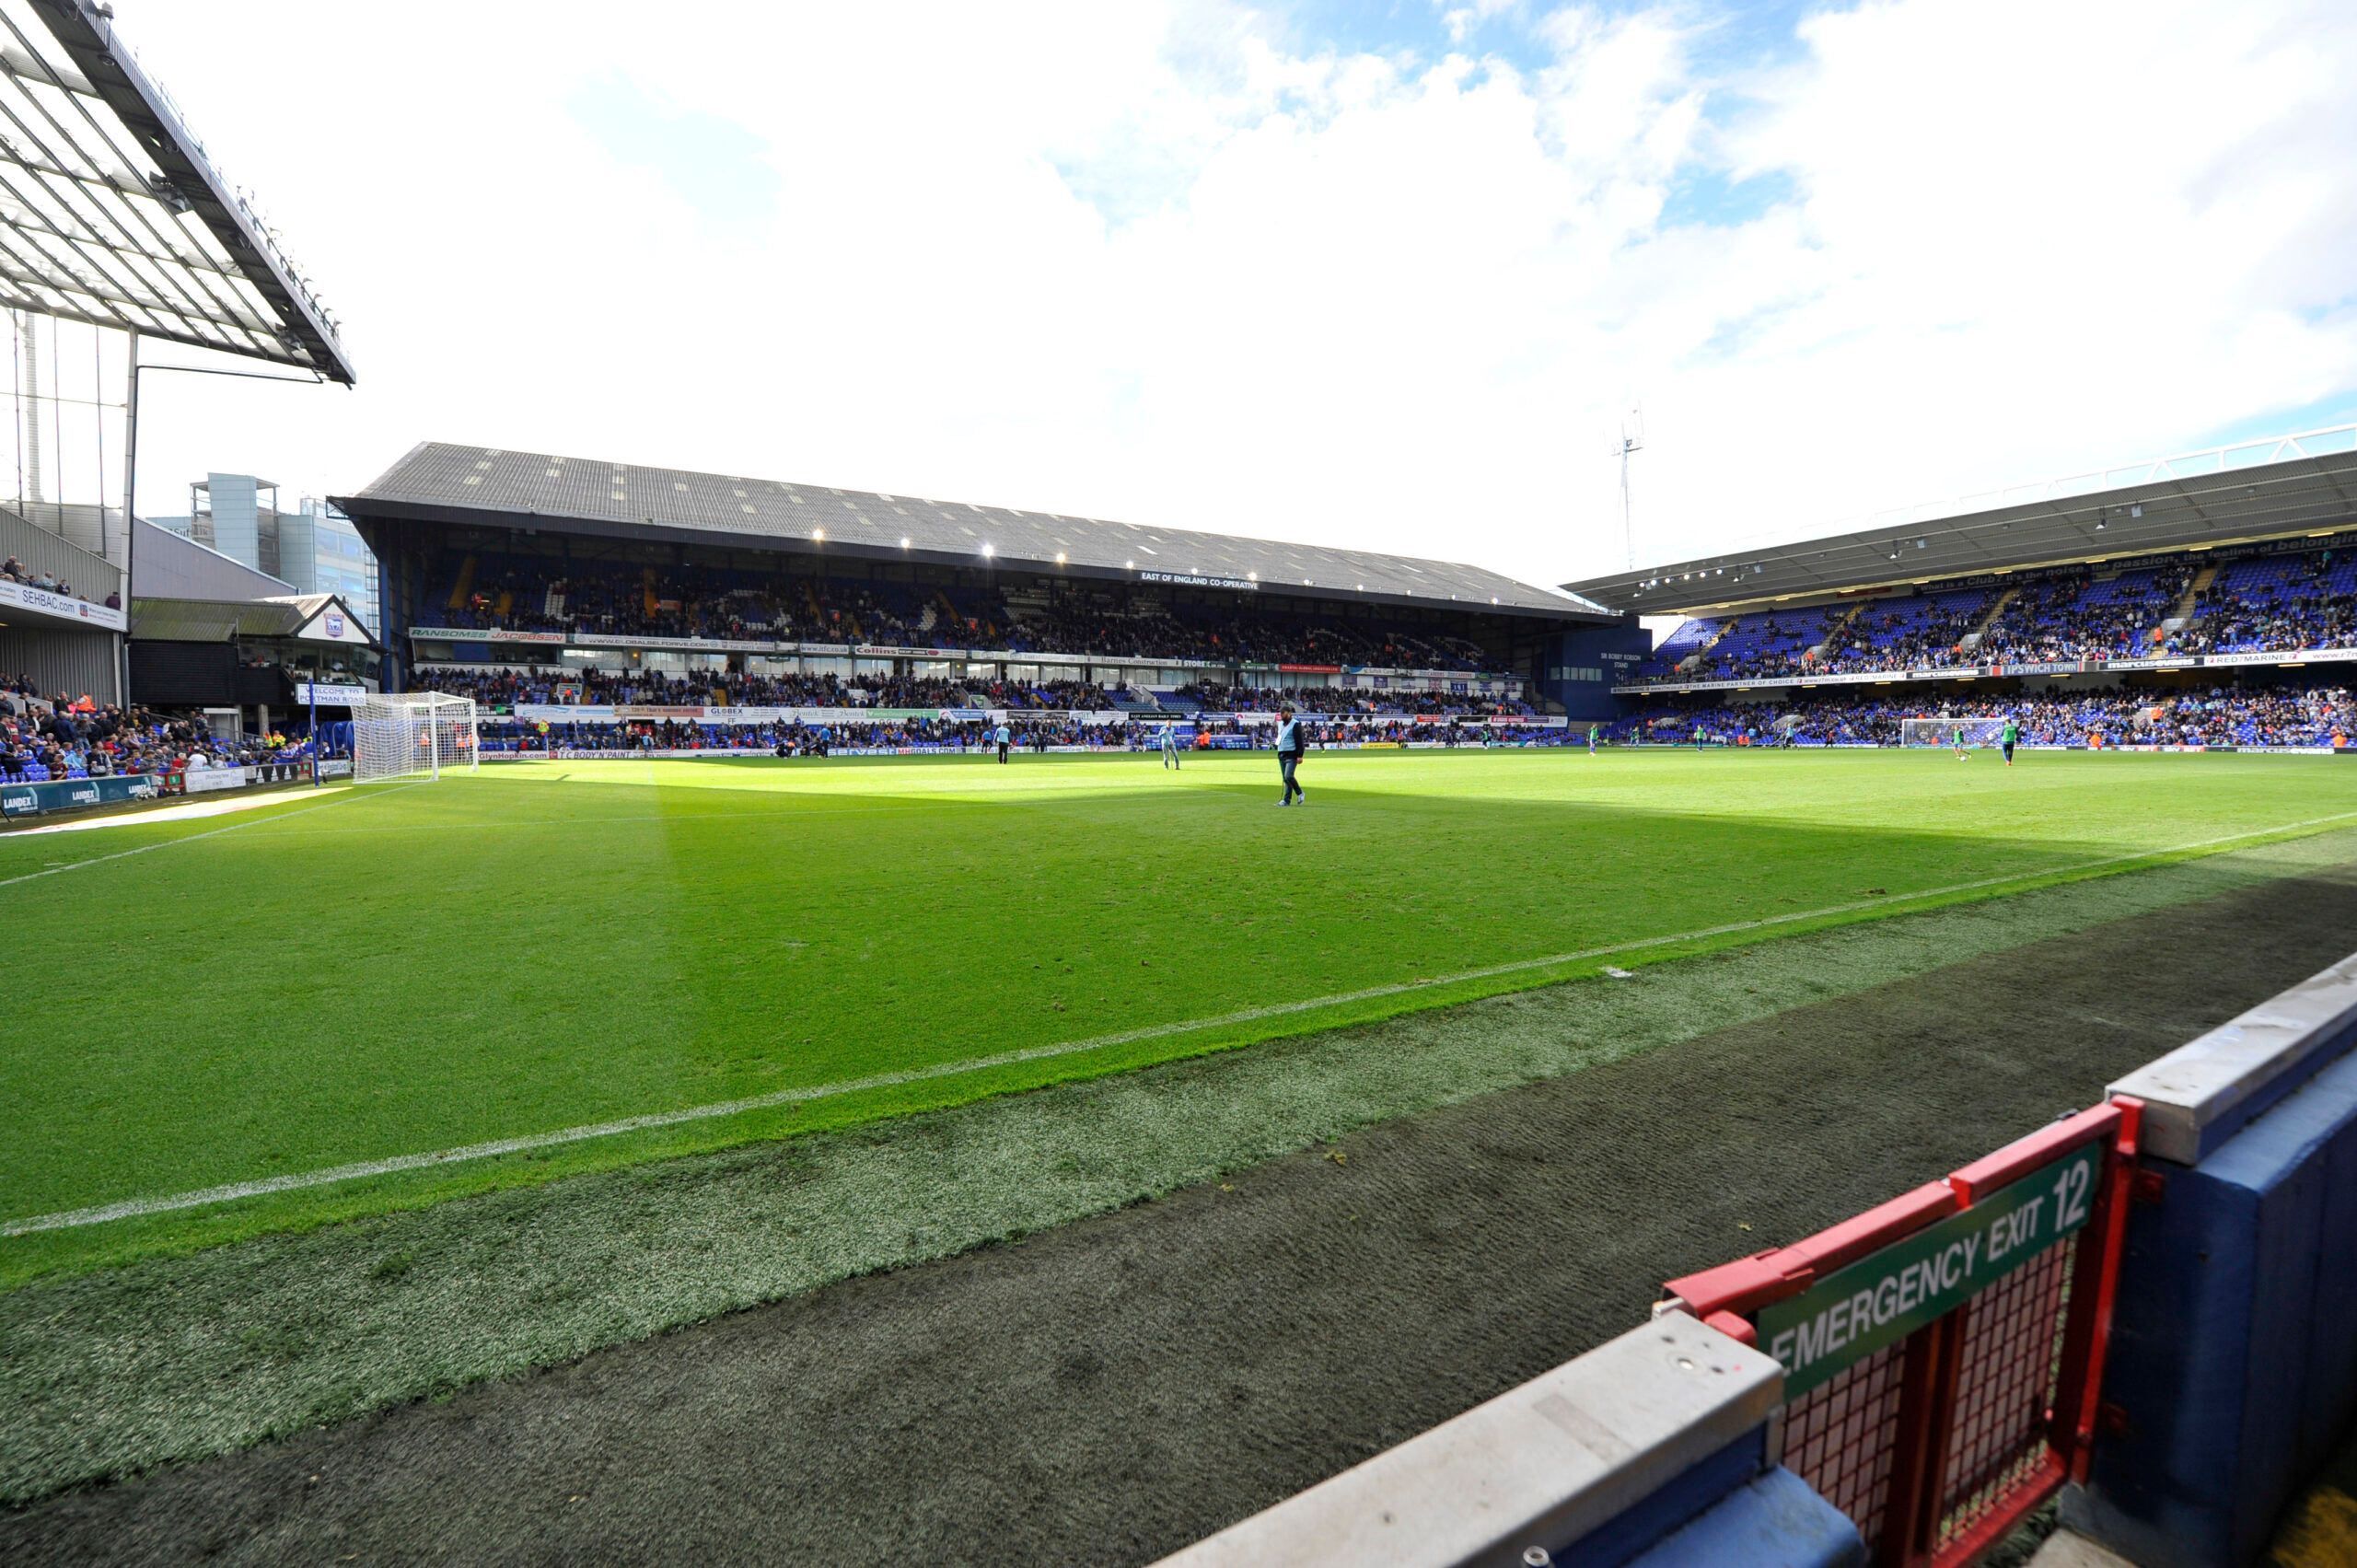 Britain Soccer Football - Ipswich Town v Huddersfield Town - Sky Bet Championship - Portman Road - 16/17 - 1/10/16
General view 
Mandatory Credit: Action Images / Adam Holt

EDITORIAL USE ONLY.